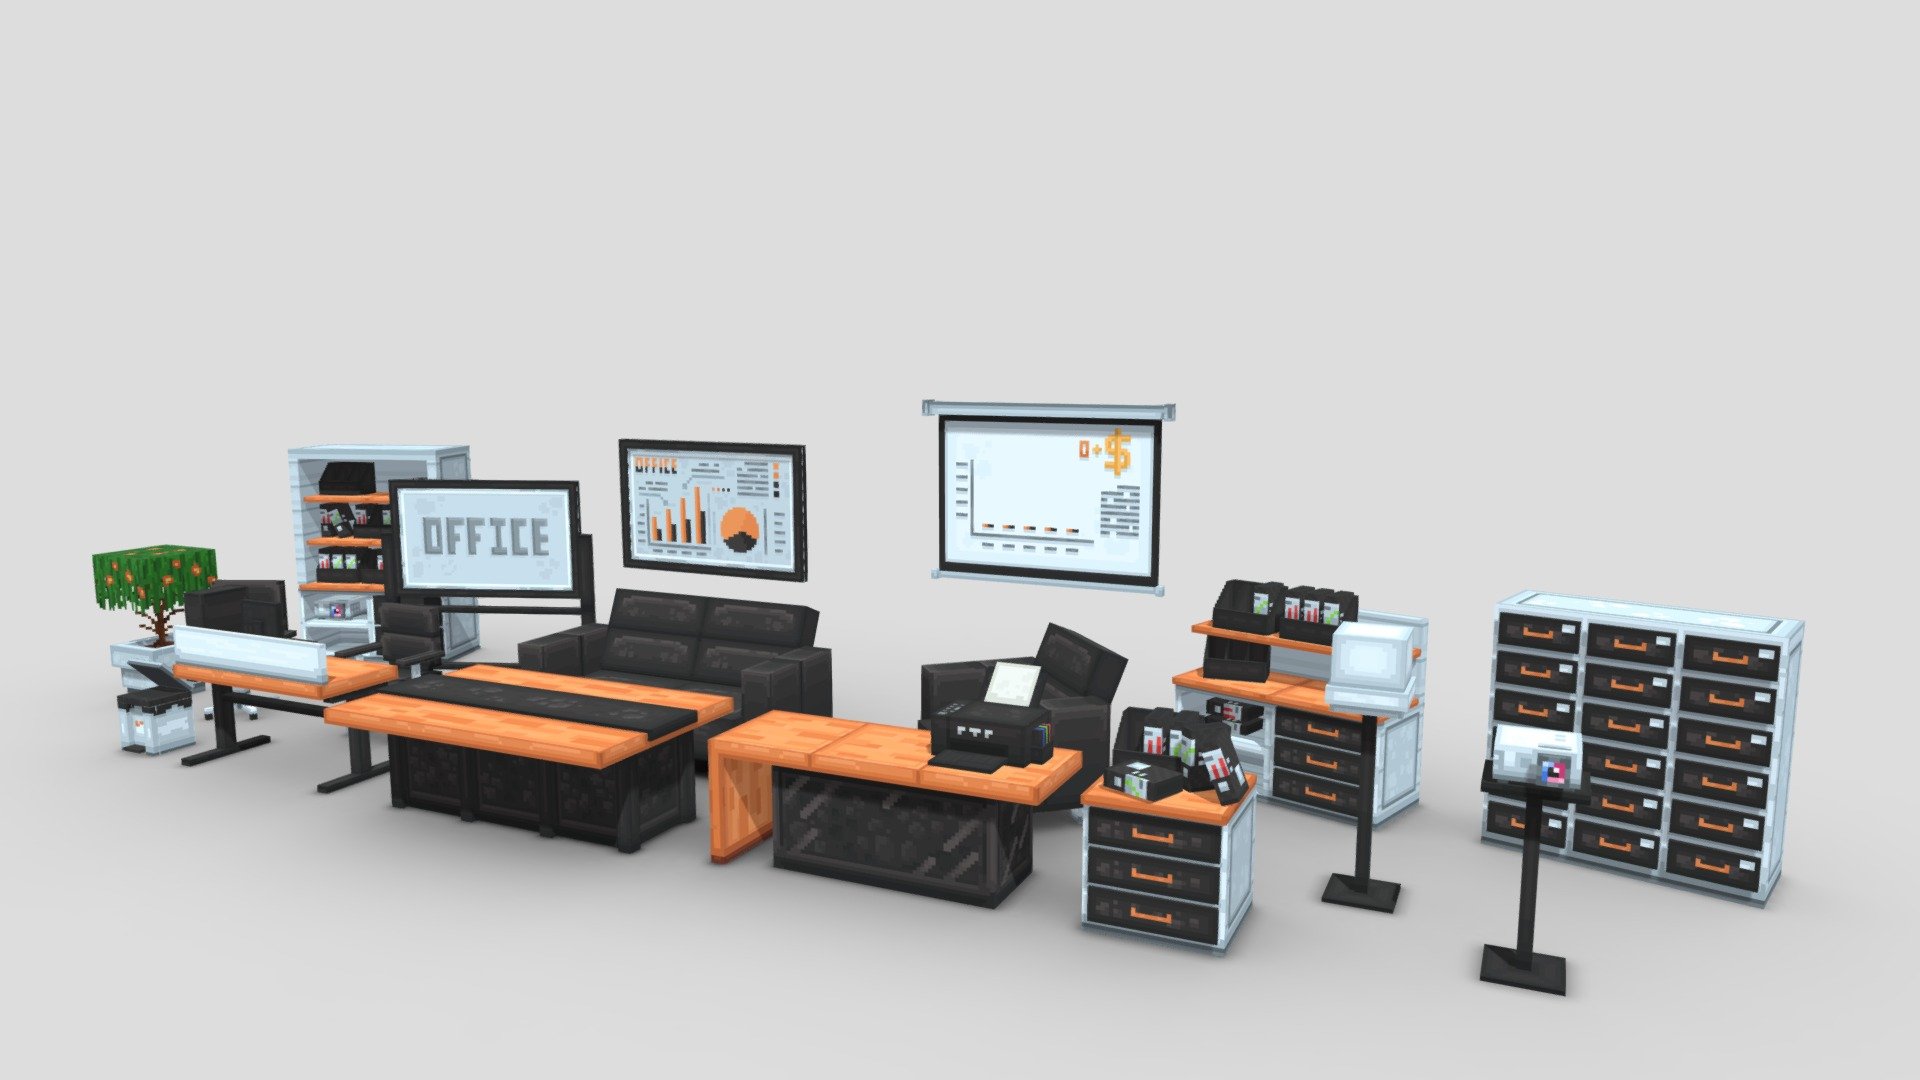 Office Furniture Volume 2, 21 Models:




Board x2

Chair Ceo

Chair

Computer

Cupboard x3

Drawer

File

Lamp

Pottedplants

Printer

Projector x2

Rubbishbin

Sofa x2

Table Ceo

Table x2
 - Office Animated Furniture Volume 2 - Buy Royalty Free 3D model by EliteCreatures 3d model